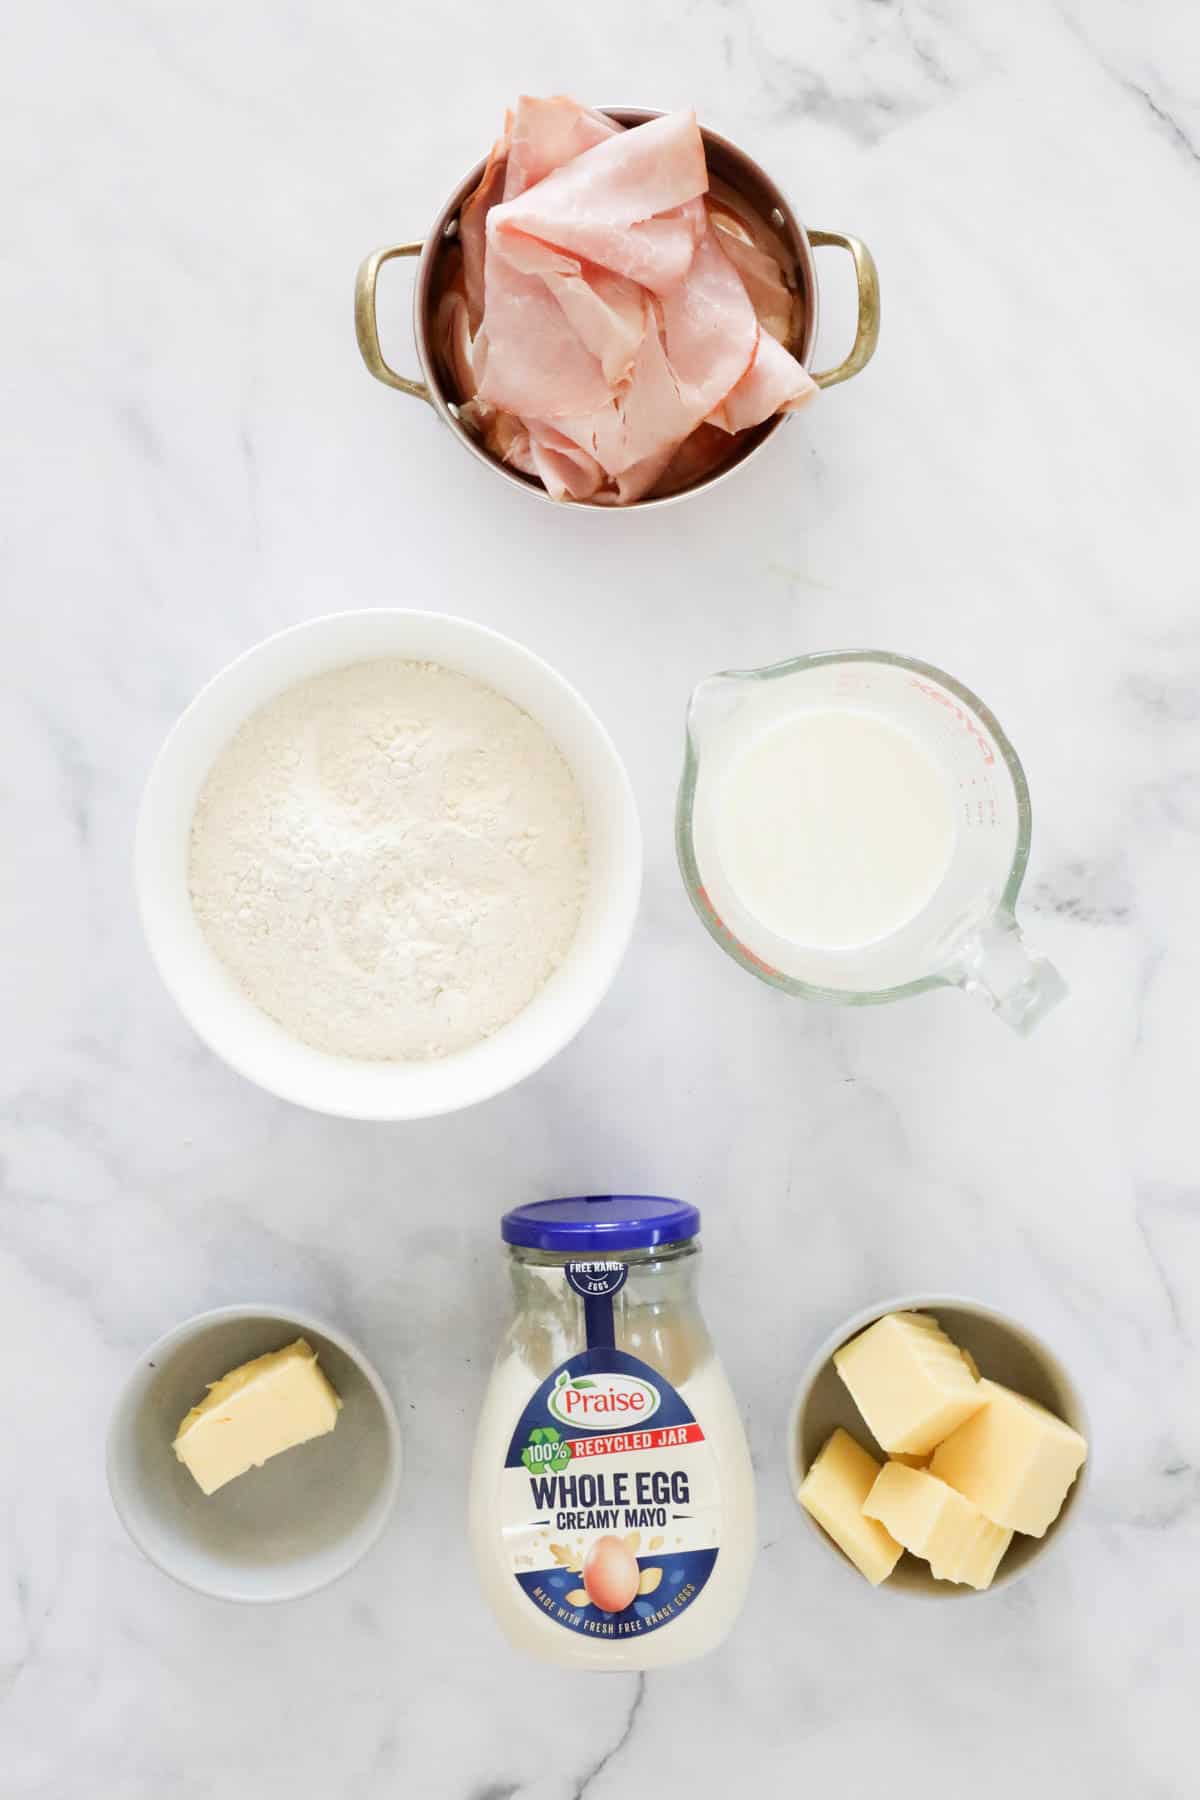 The ingredients for ham, cheese and mayo scrolls.